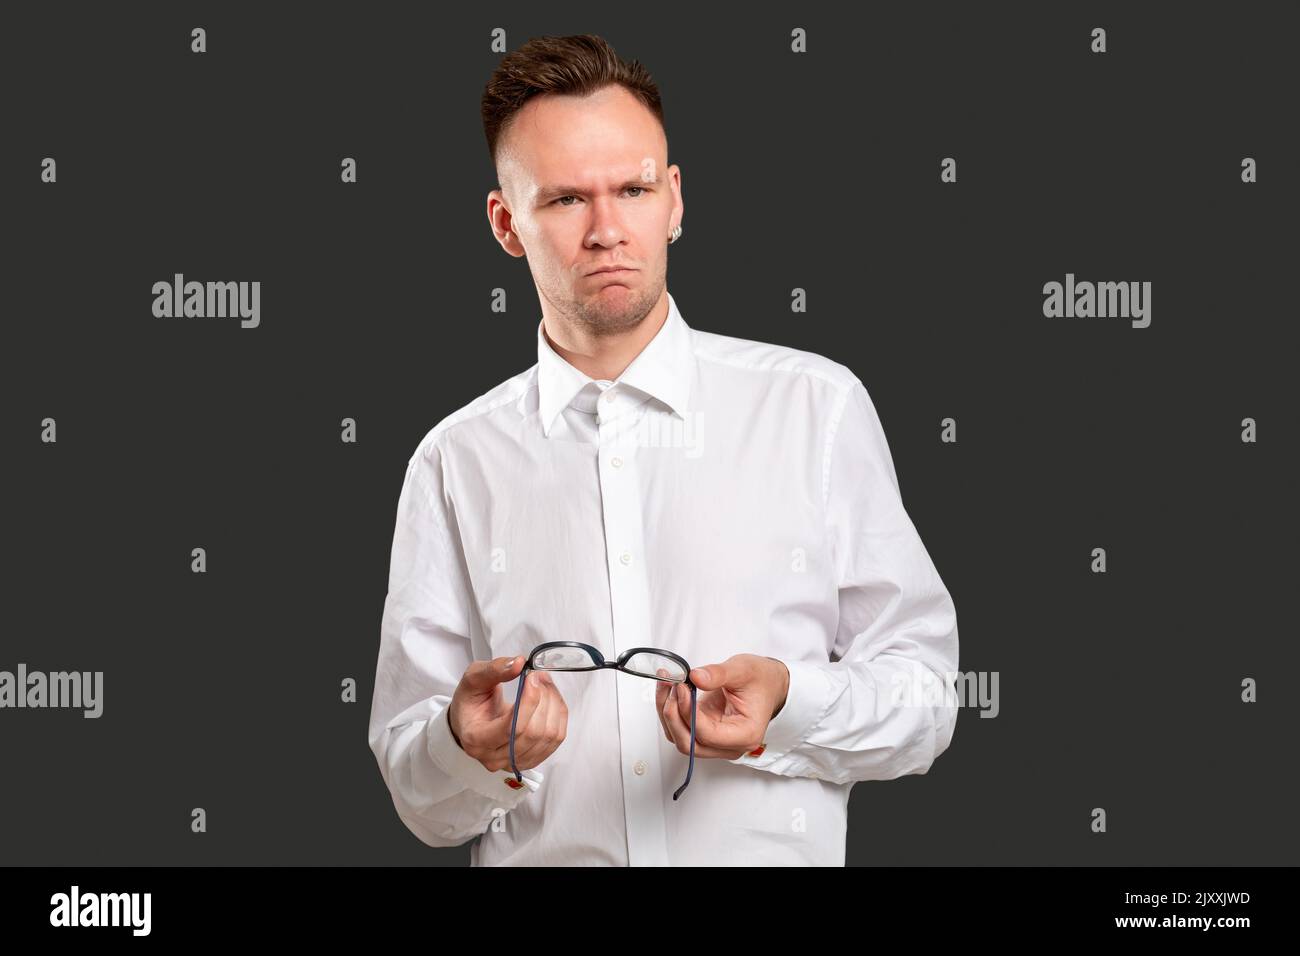 shocked man portrait failure disappointment guy Stock Photo